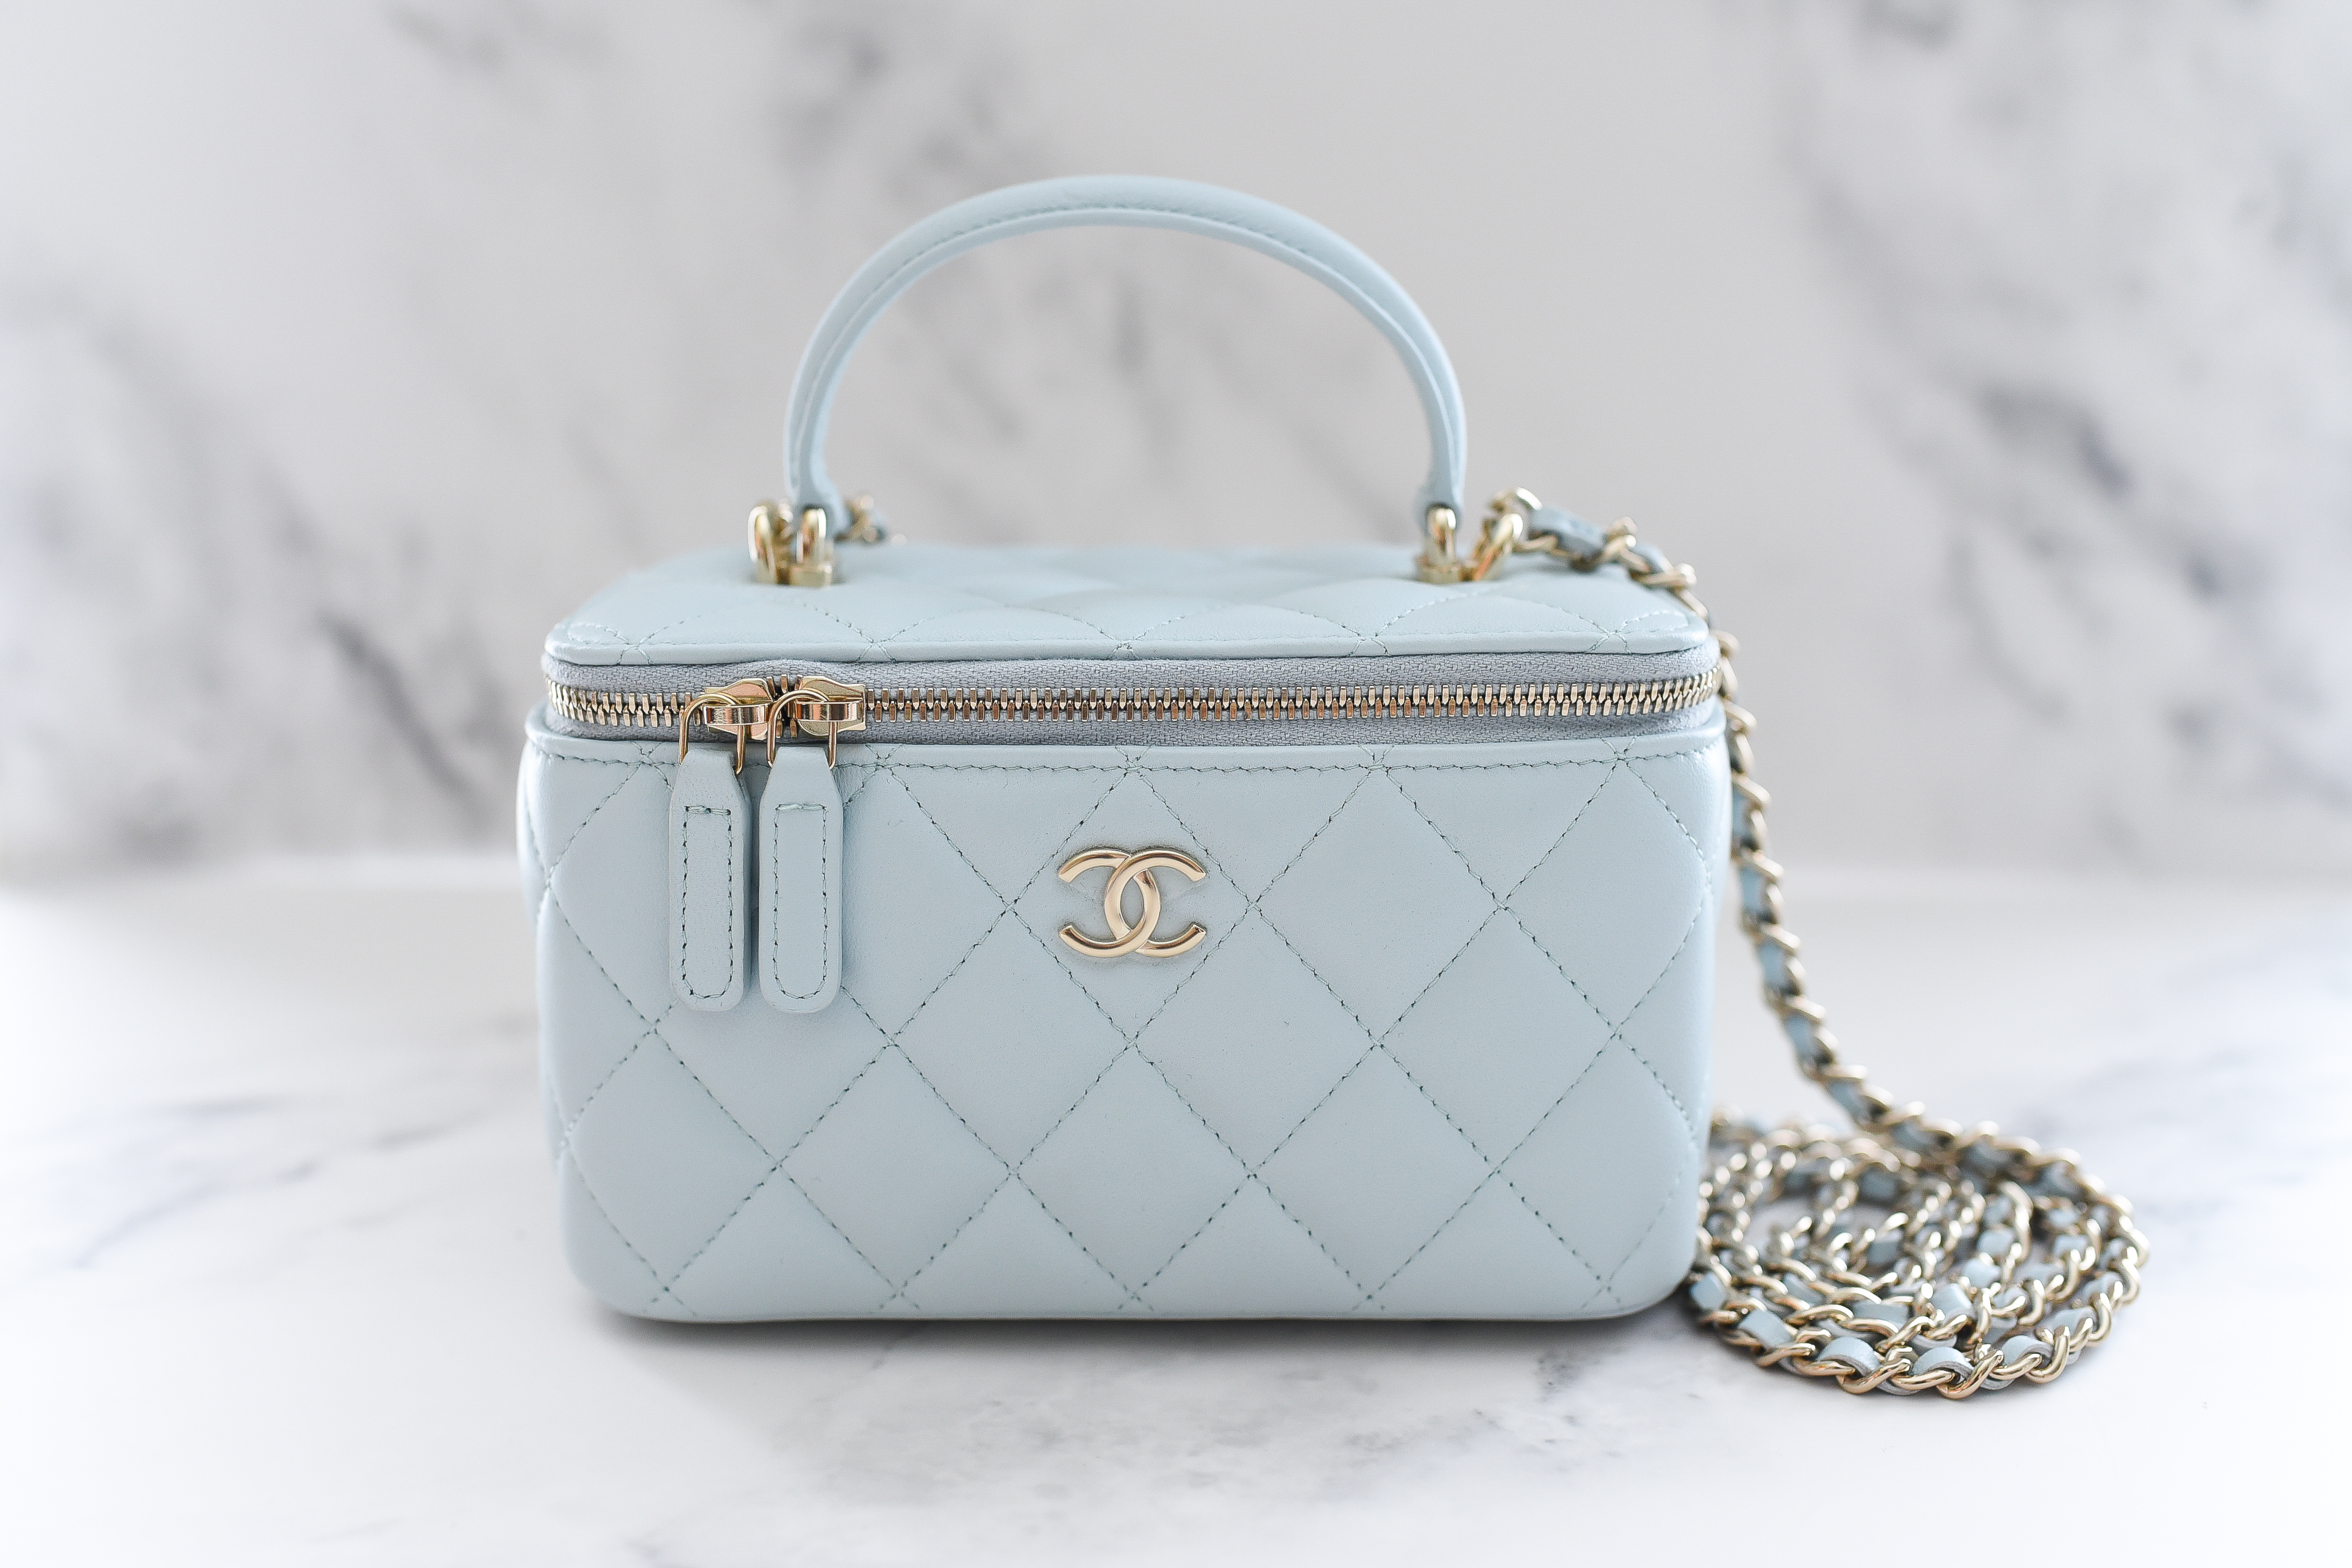 Chanel Top Handle Vanity with Chain, Light Blue Lambskin with